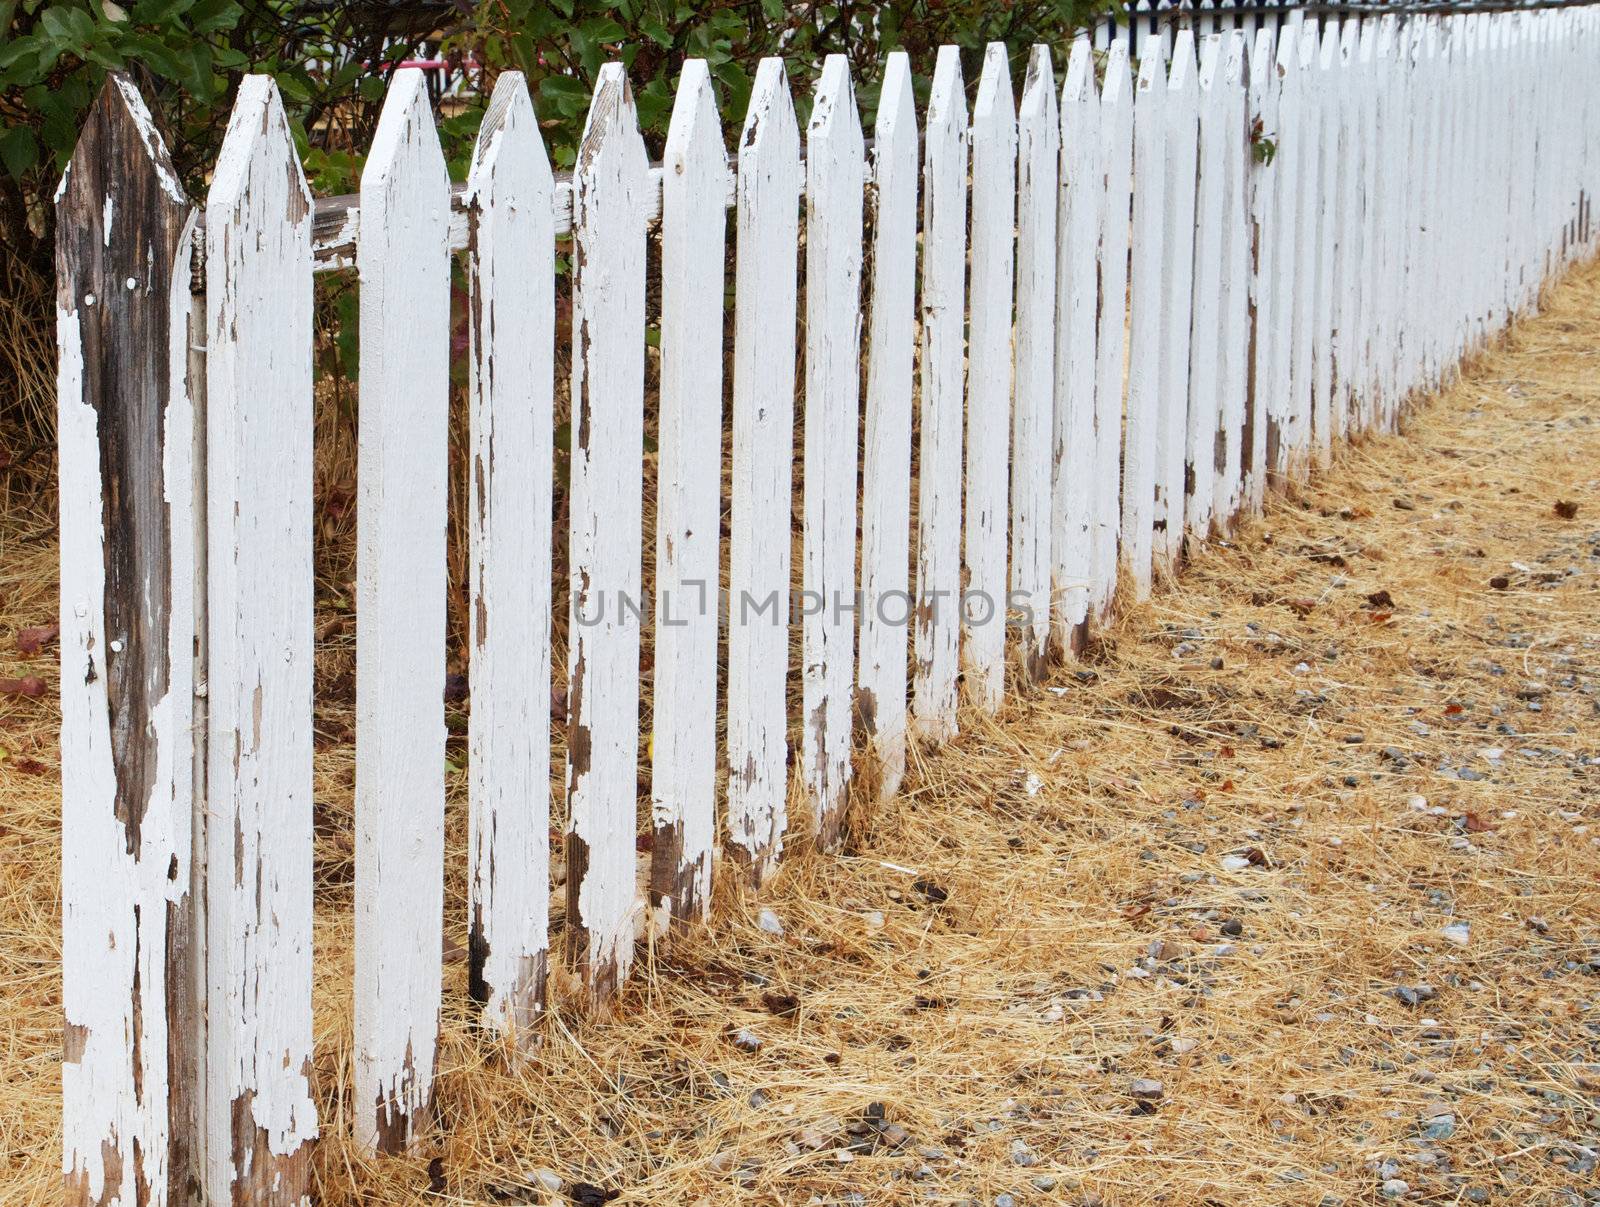 Weathered and peeling white picket fence trialing into dimishing perspective